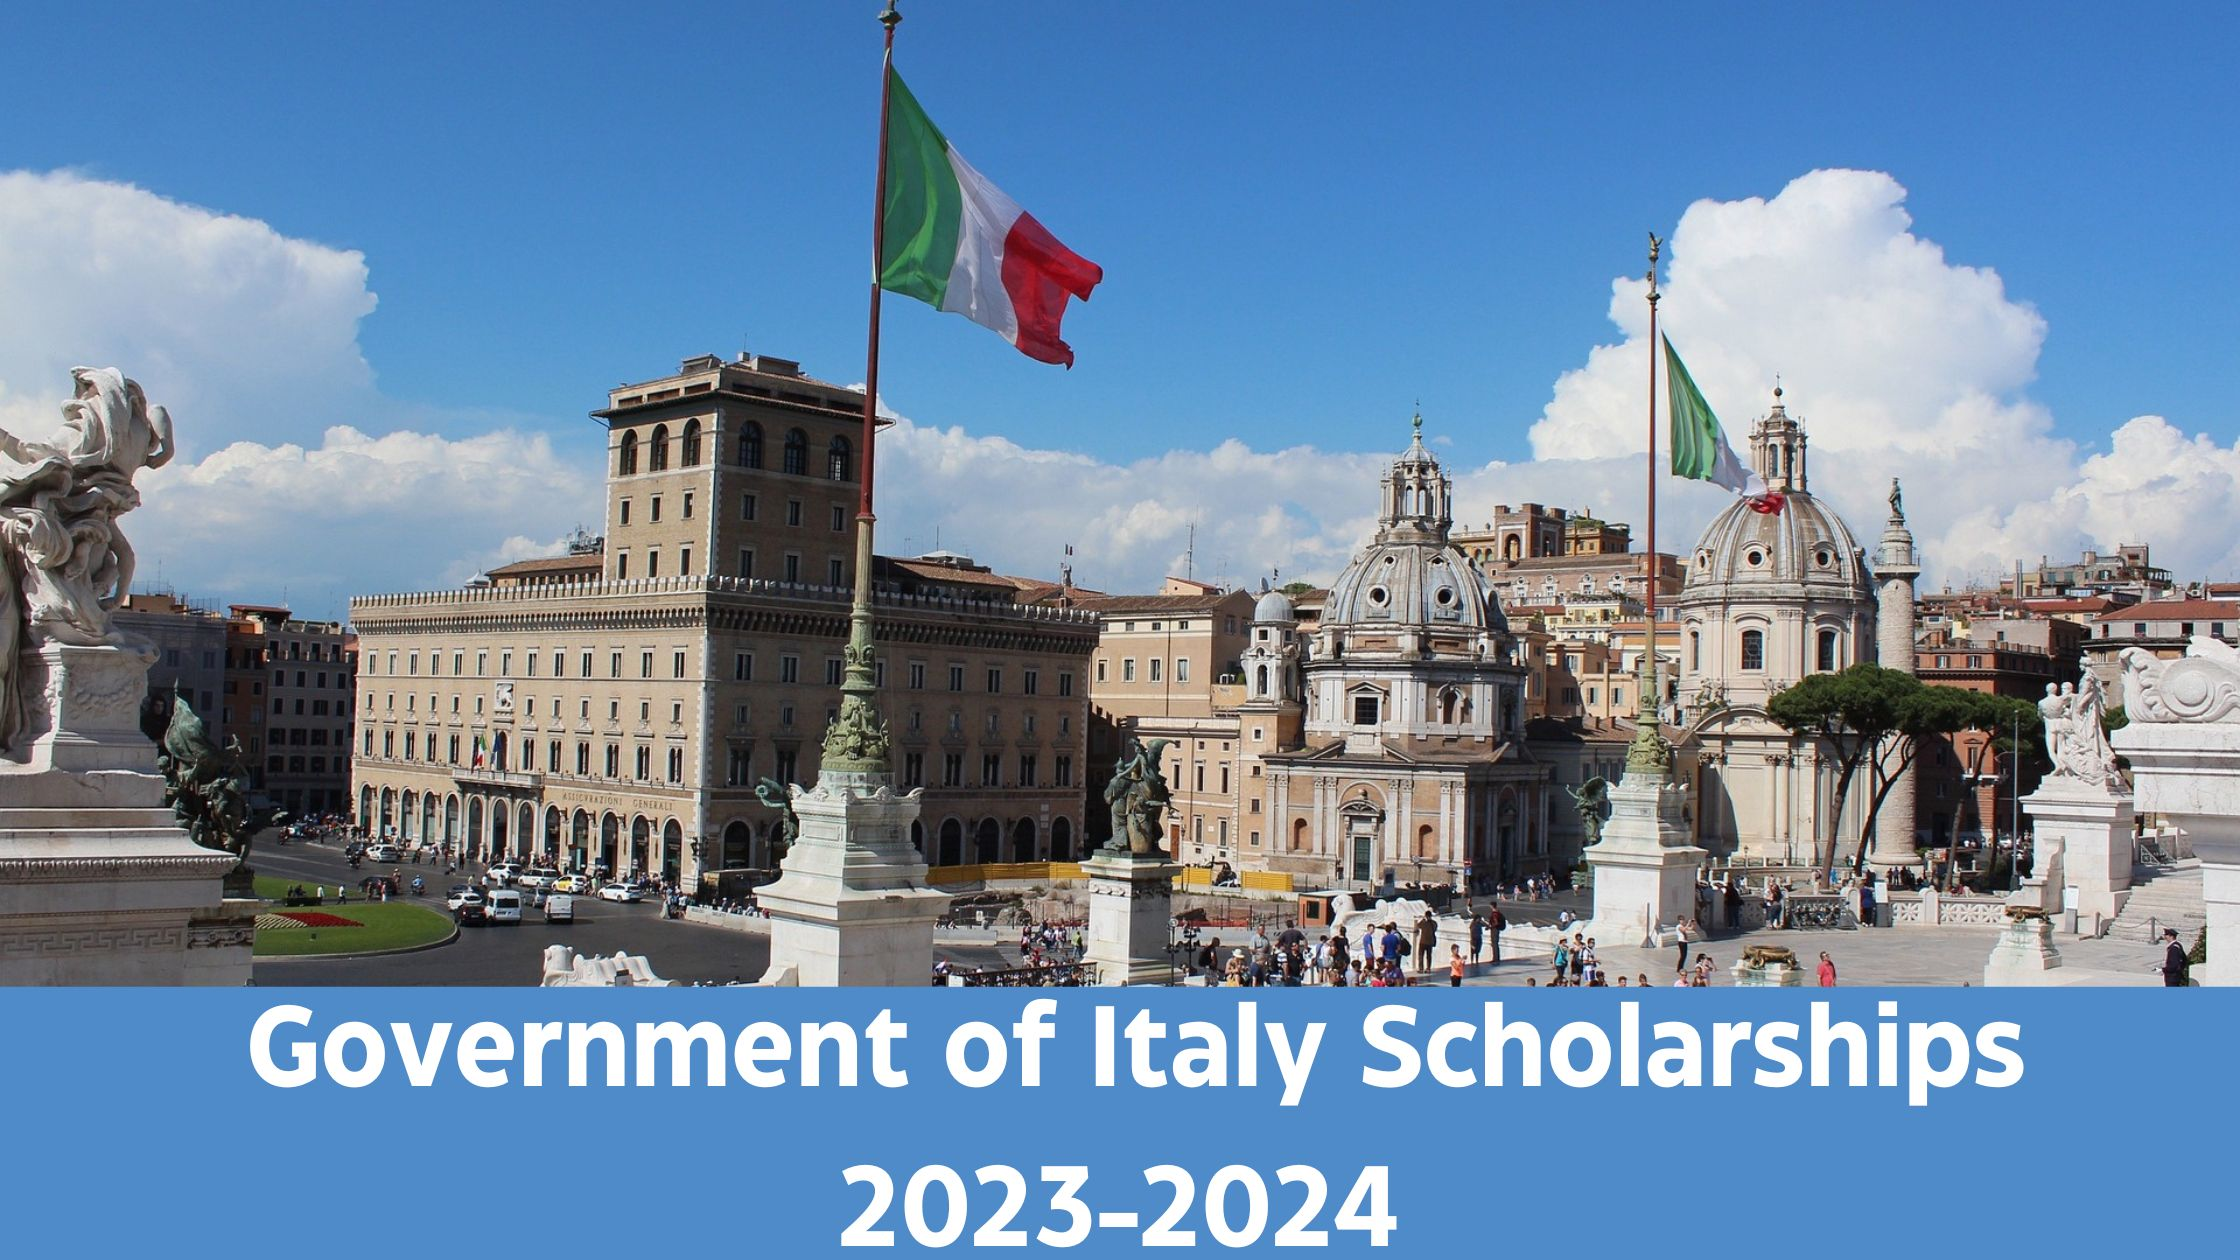 Government of Italy Scholarships 2023-2024